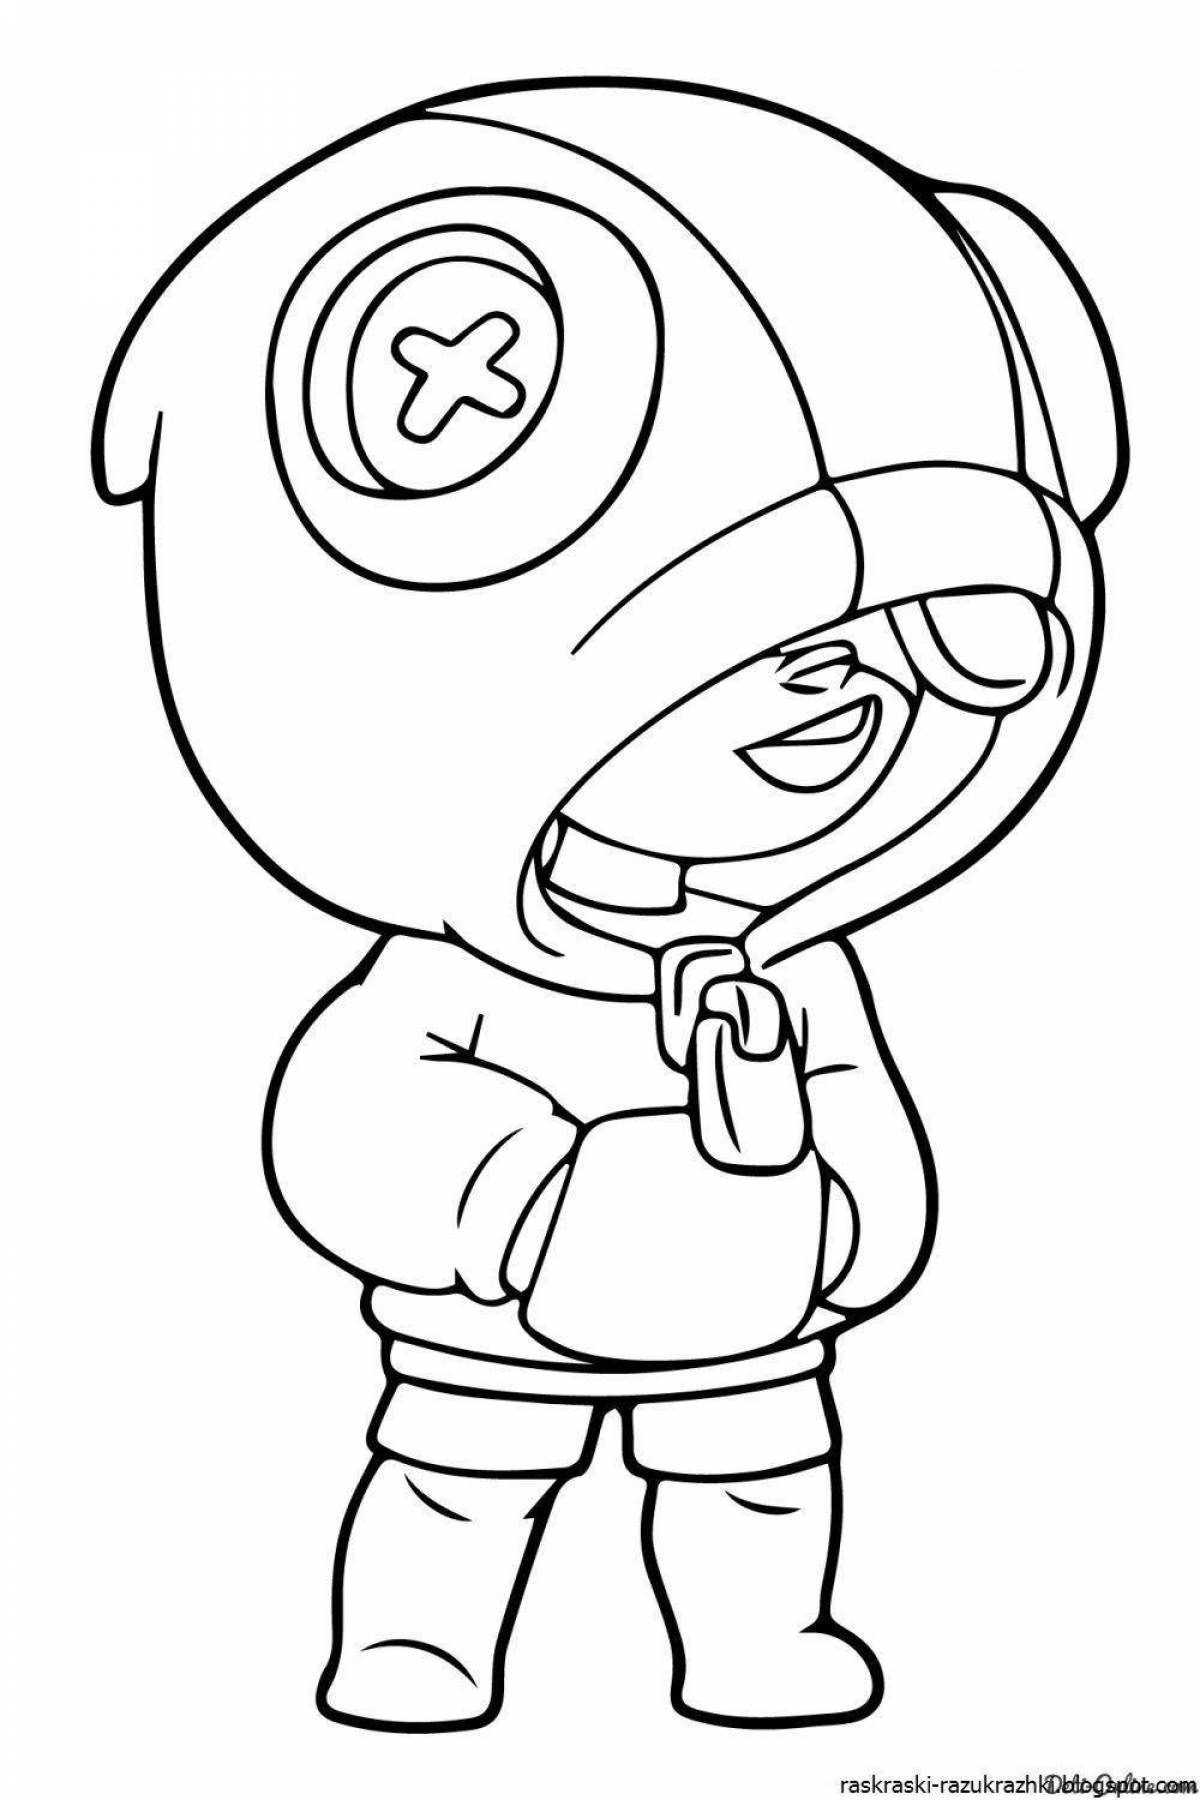 Coloring pages brawl stars pins